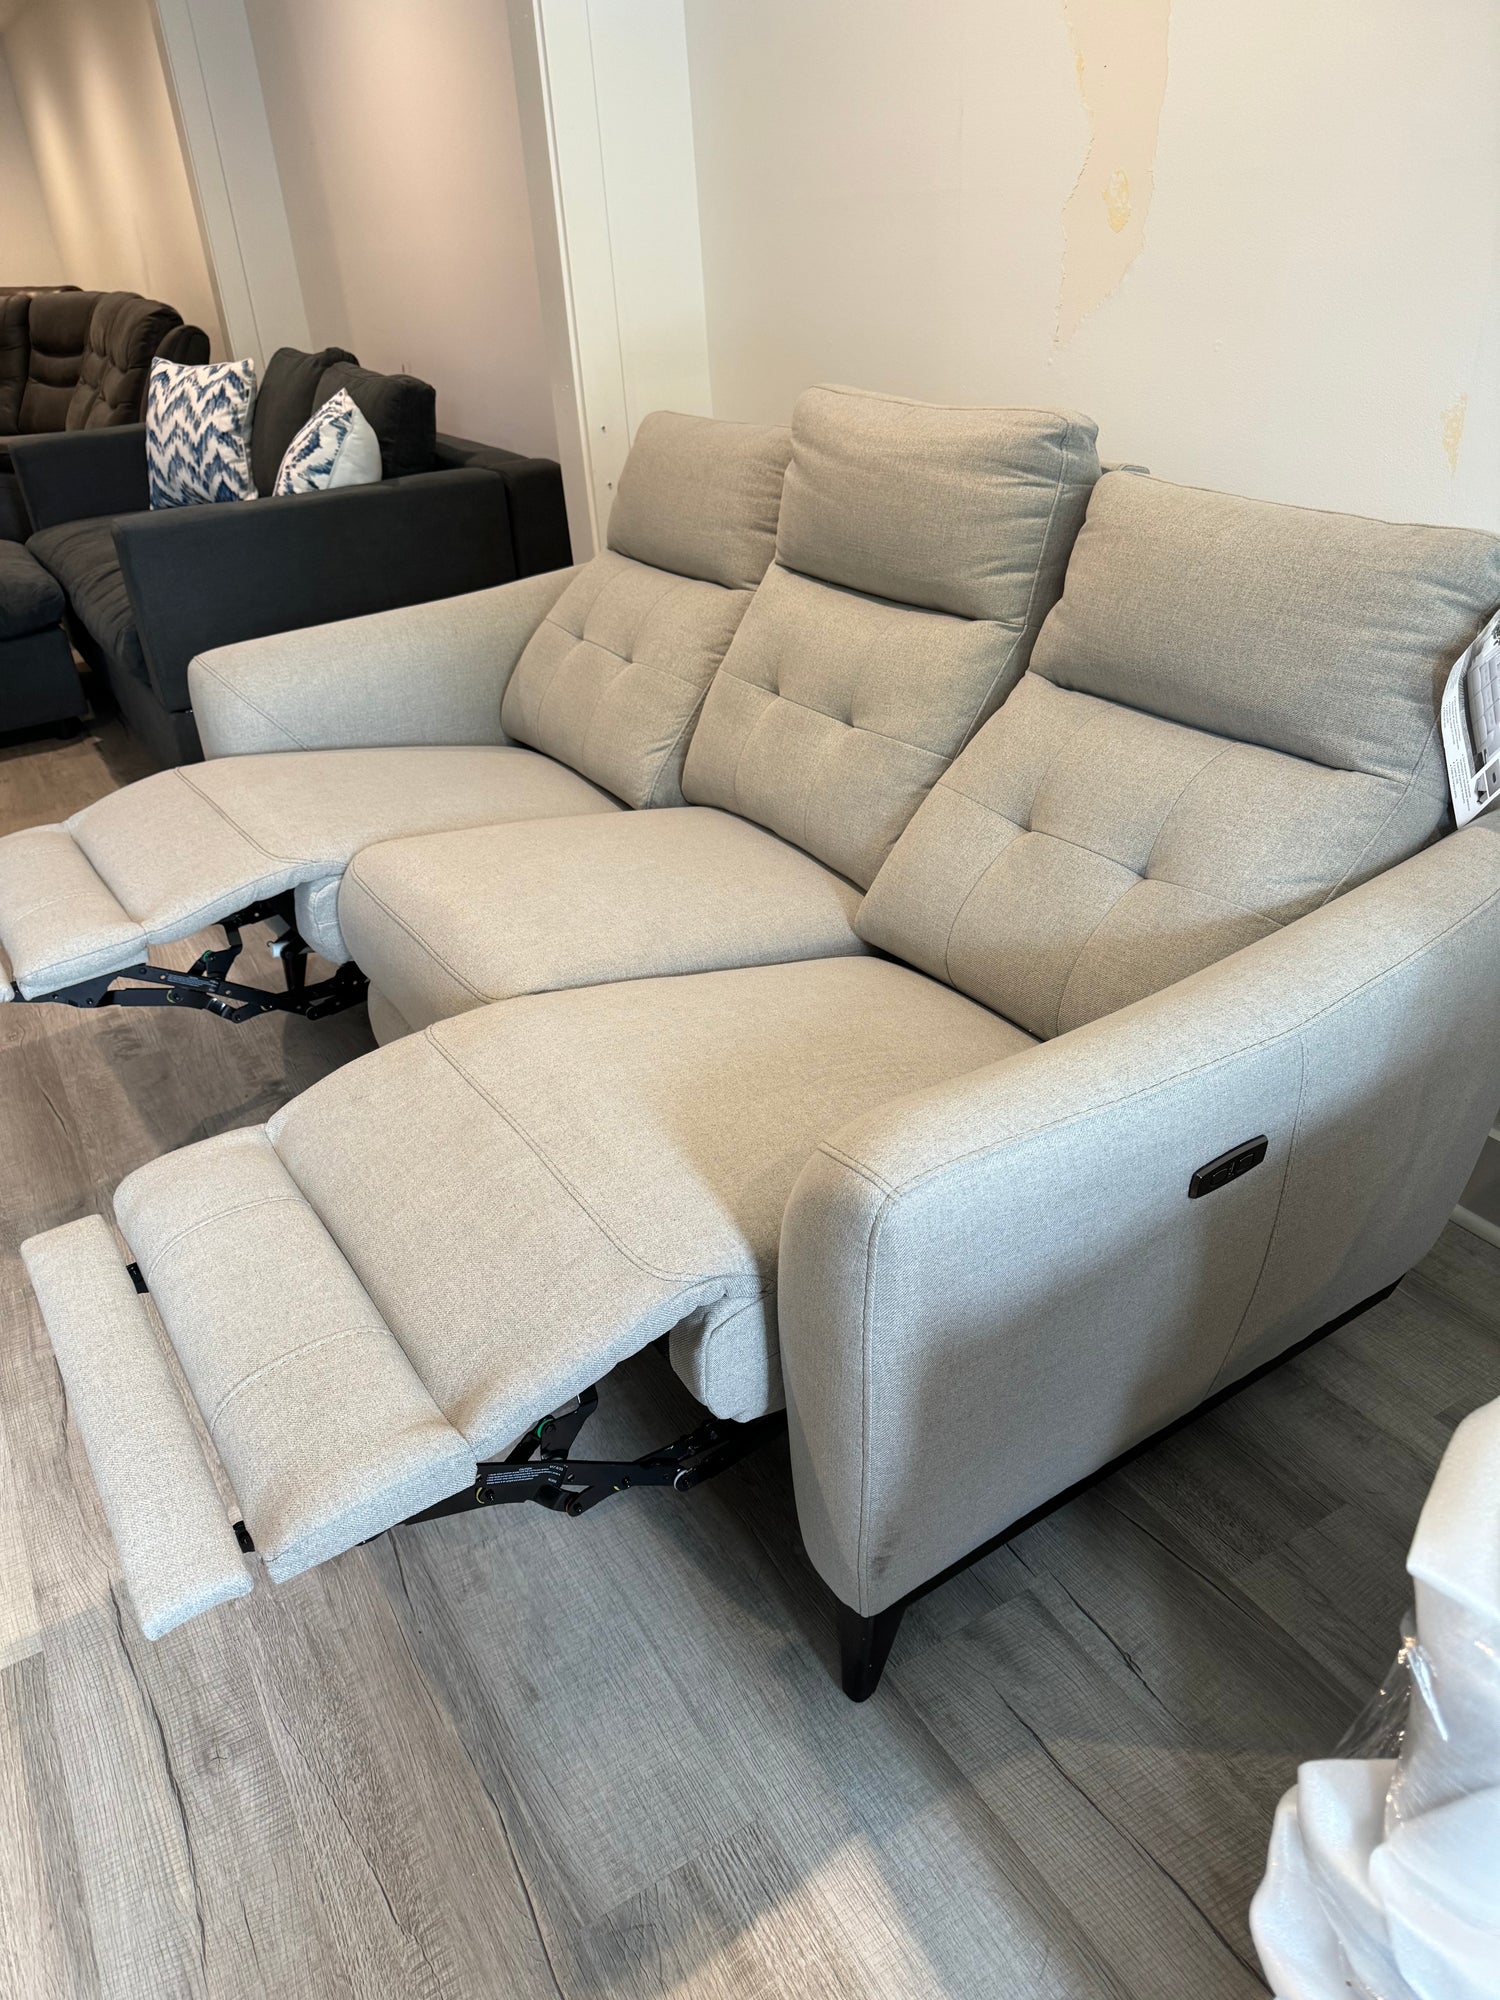 Alpendale Fabric Power Reclining Sofa with Power Headrests